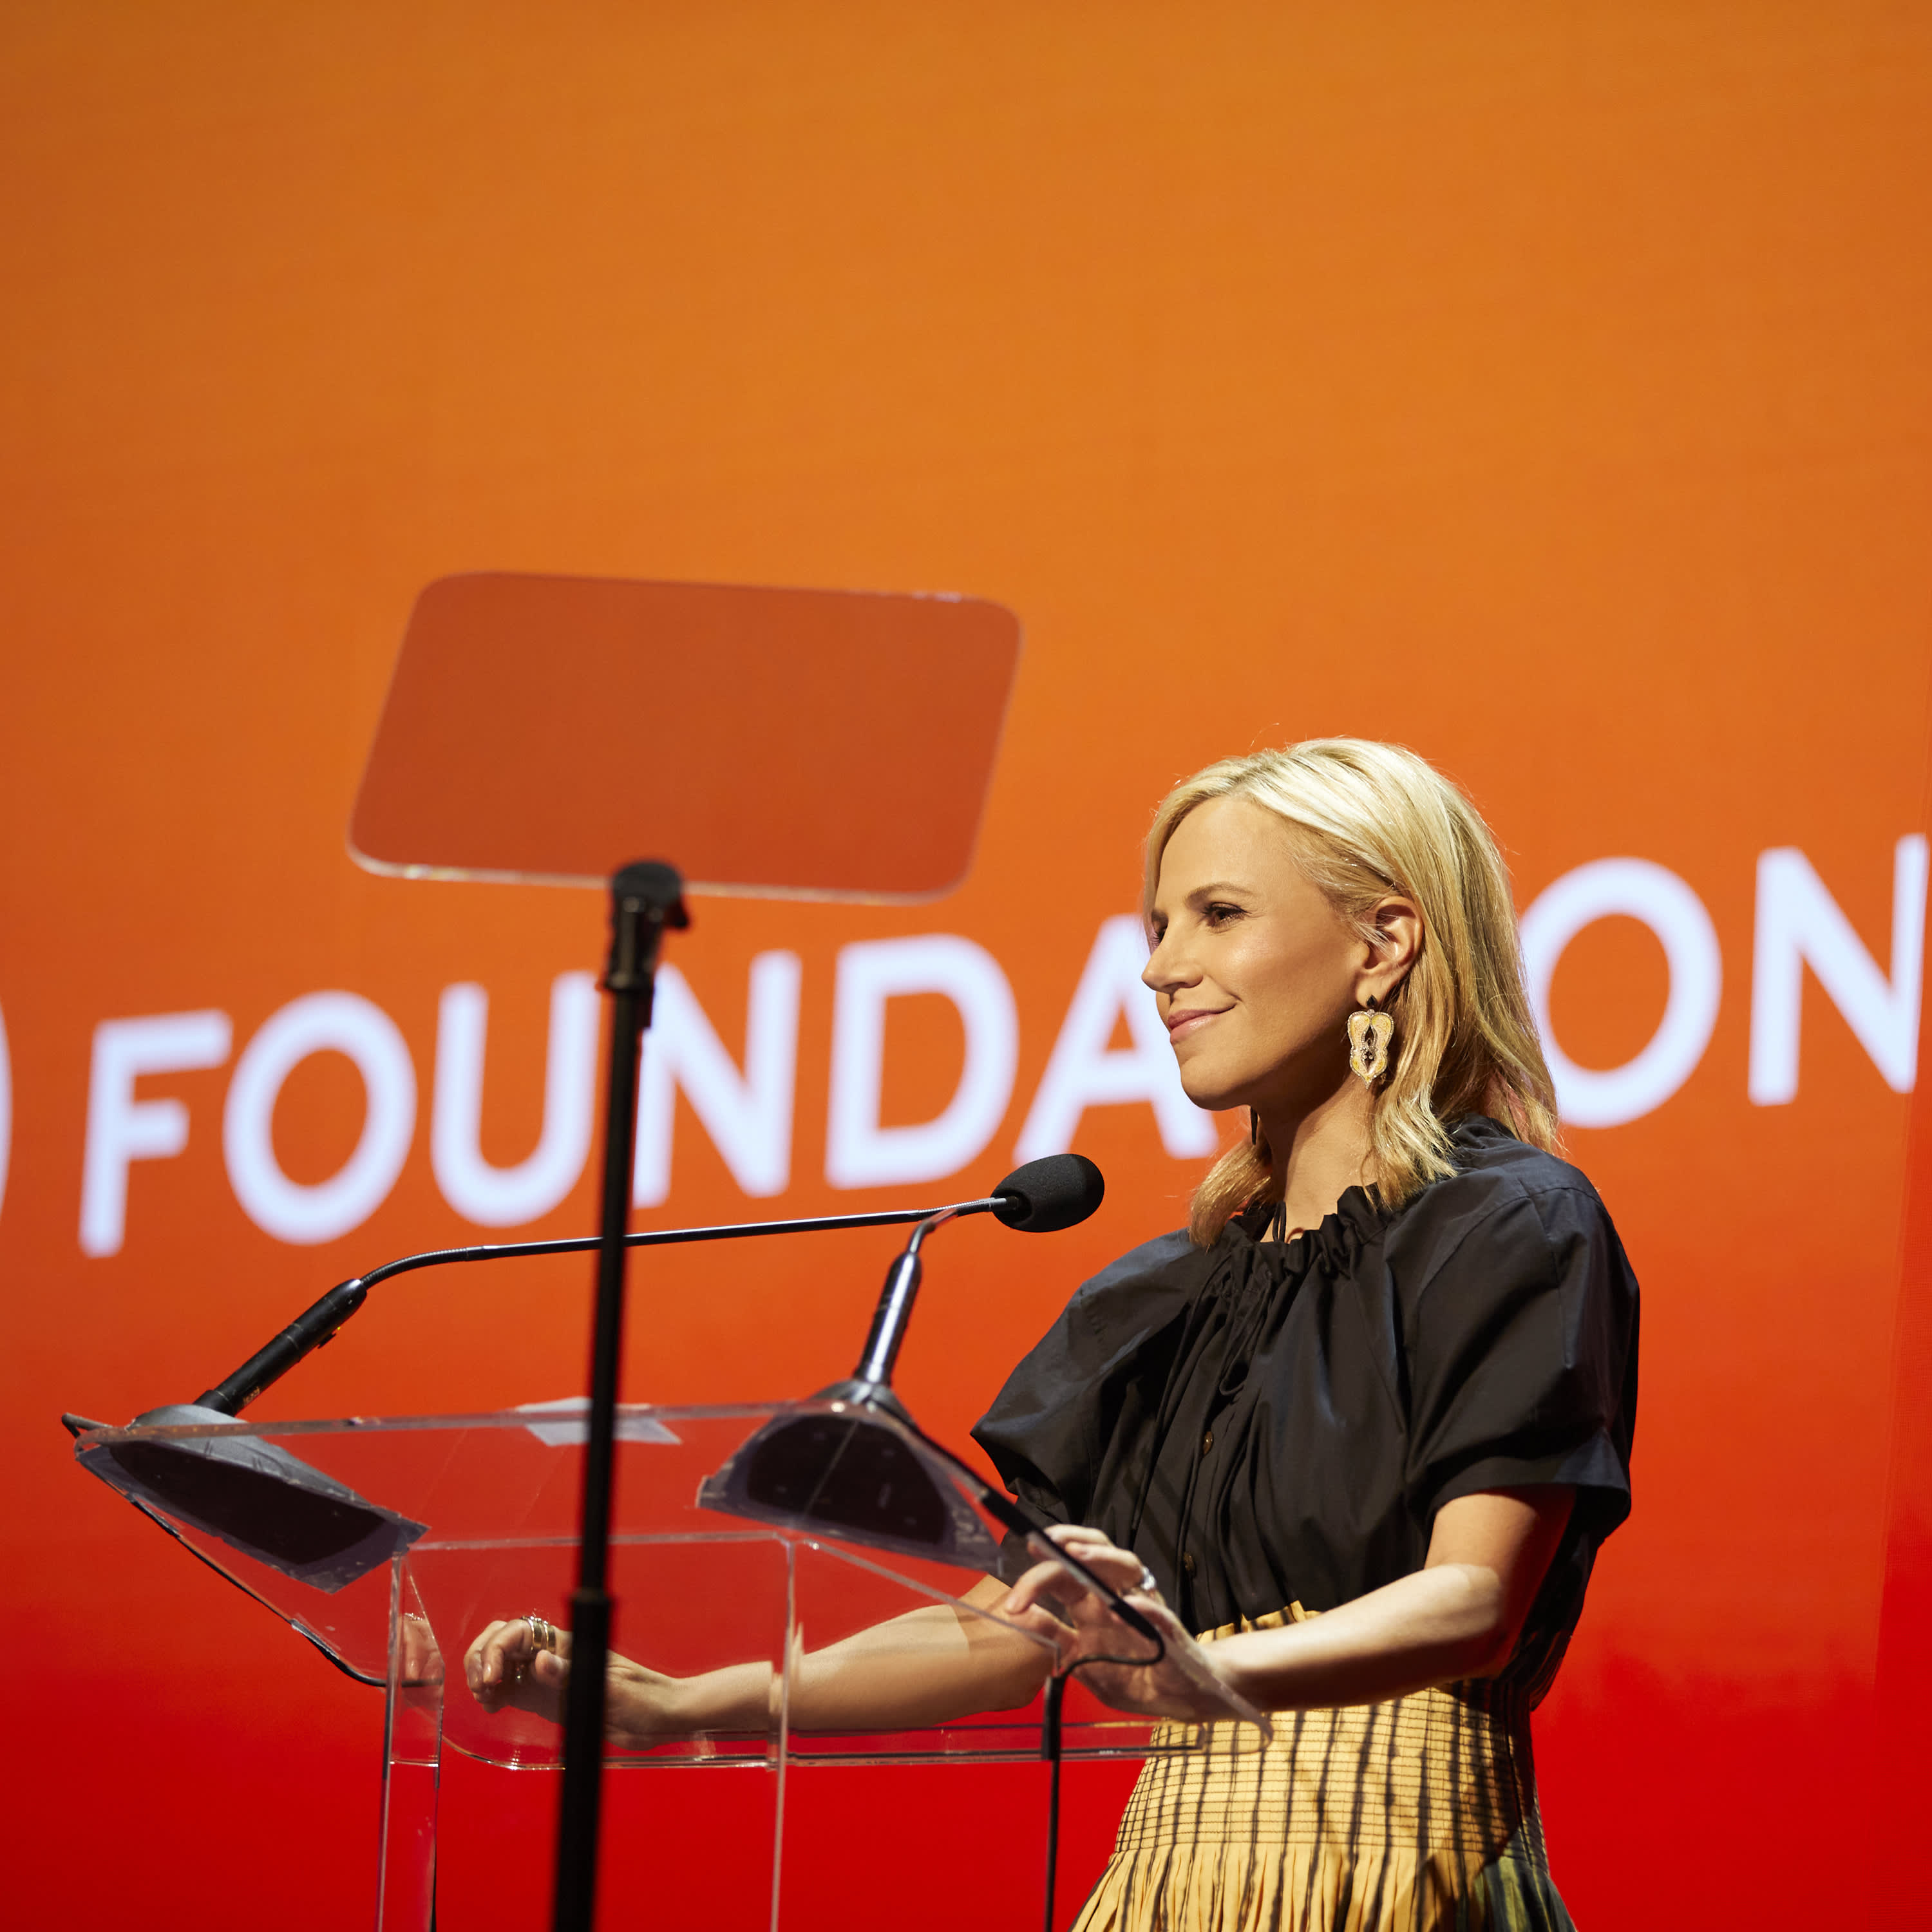 Tory Burch wants to see more business leaders speak up about social issues